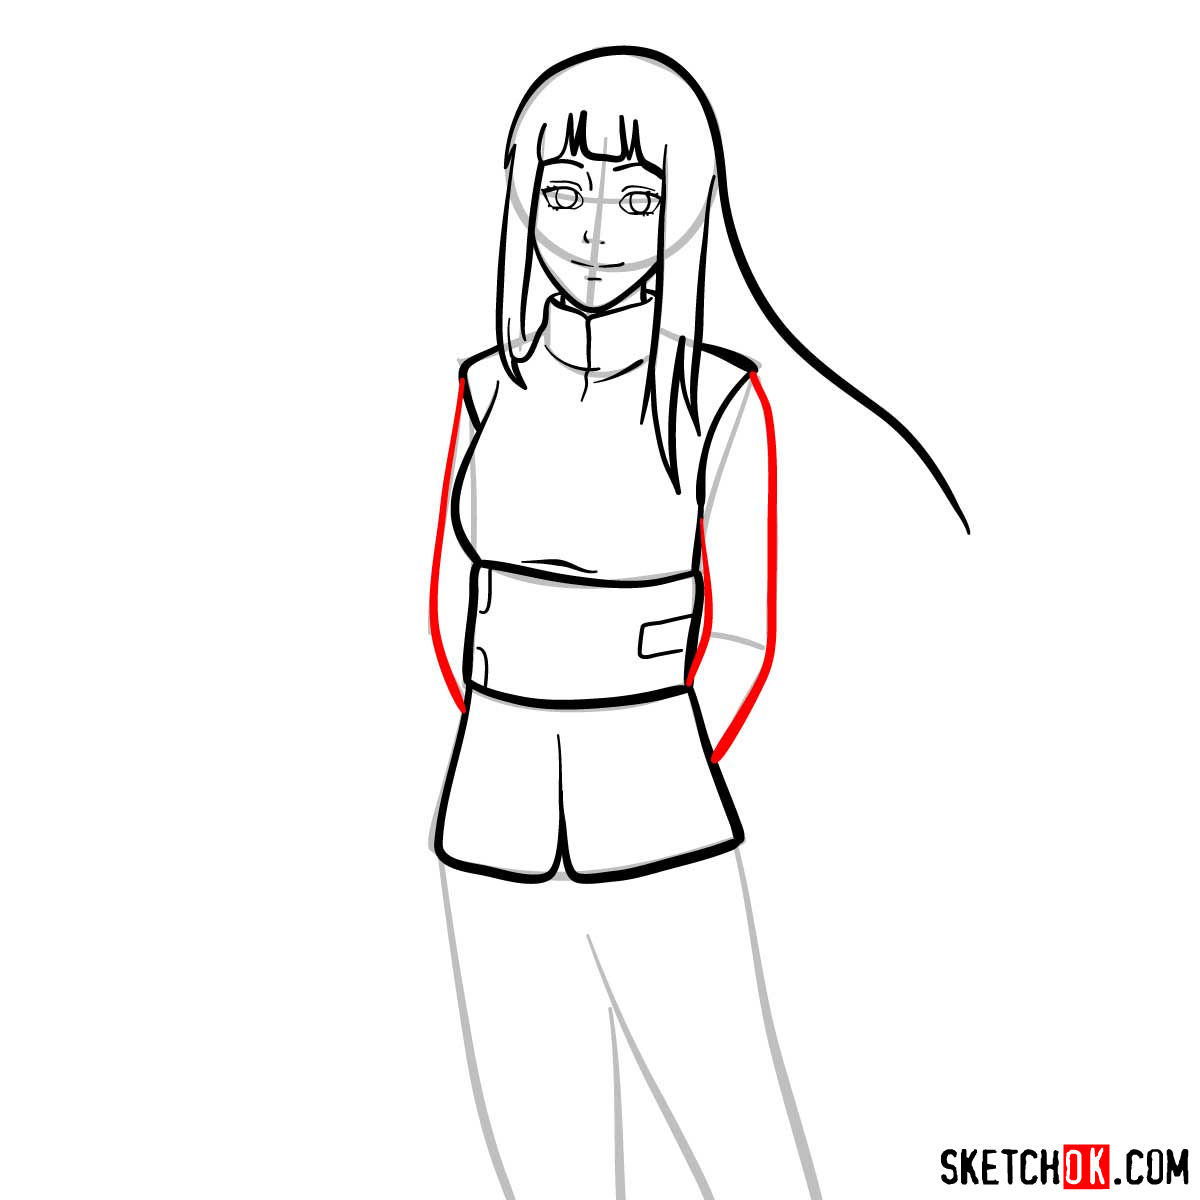 How to draw Hinata from Naruto anime - step 08